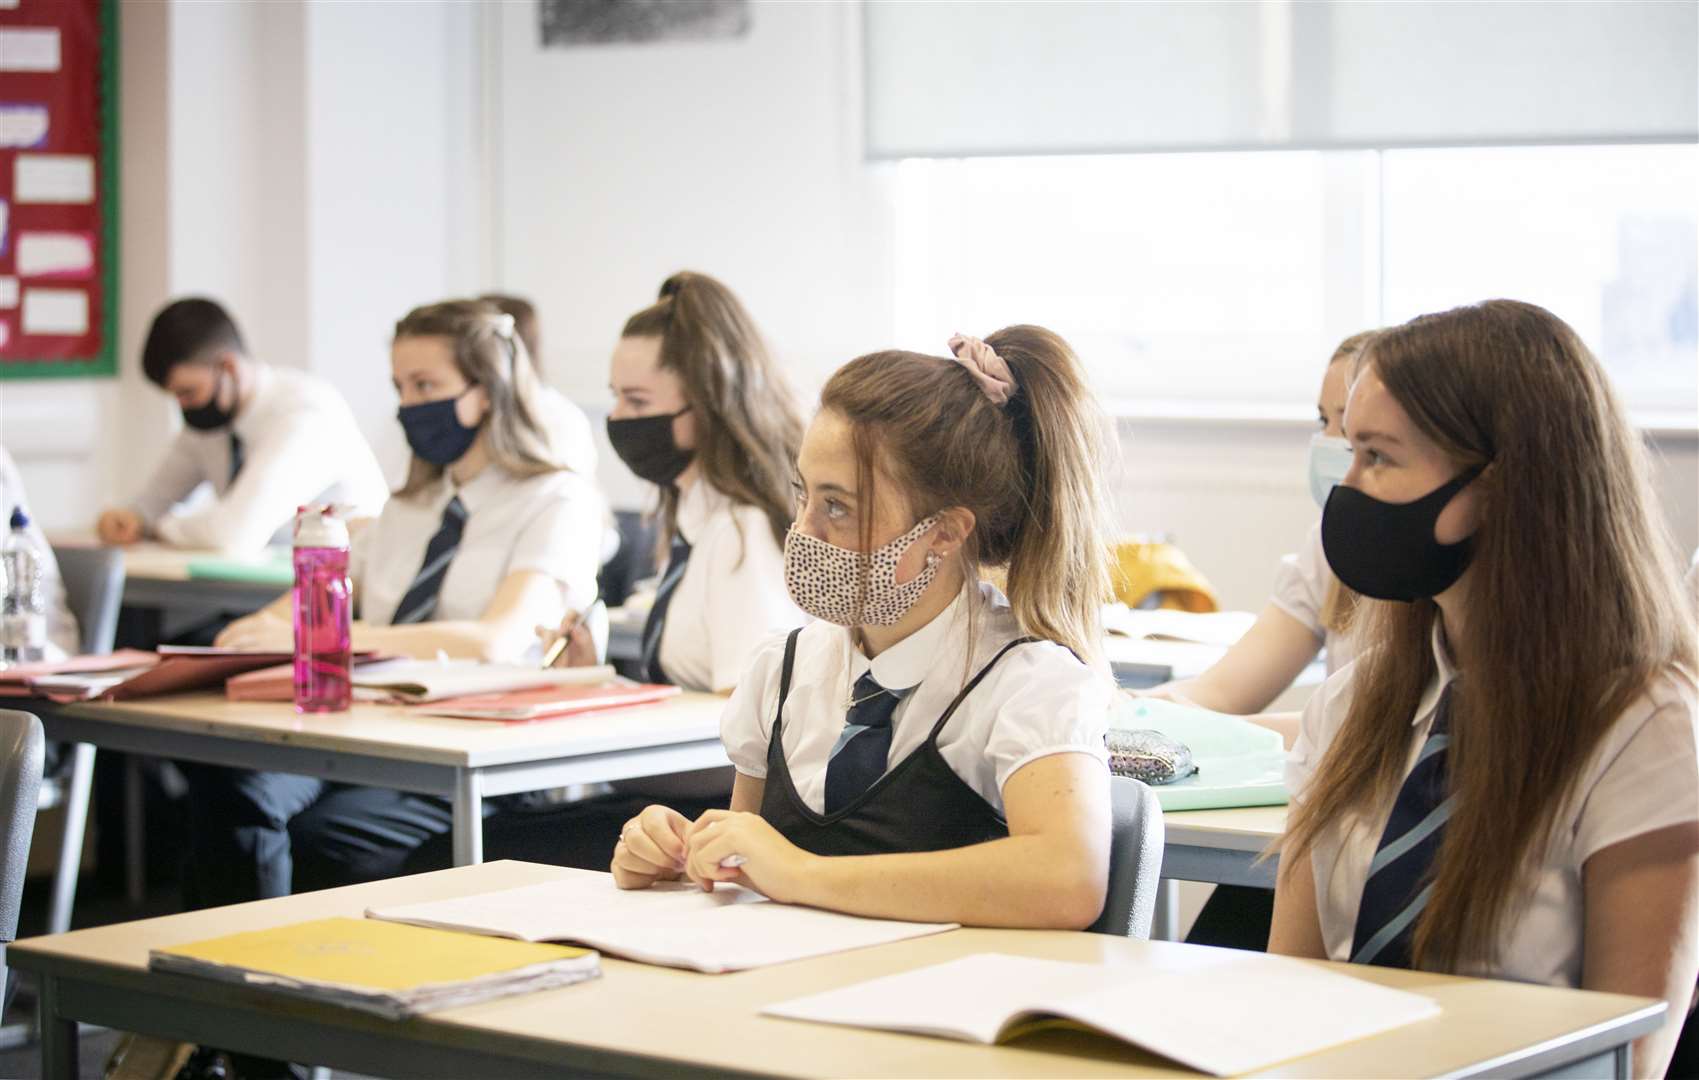 Secondary schools need more than 40,000 volunteers to mass test pupils